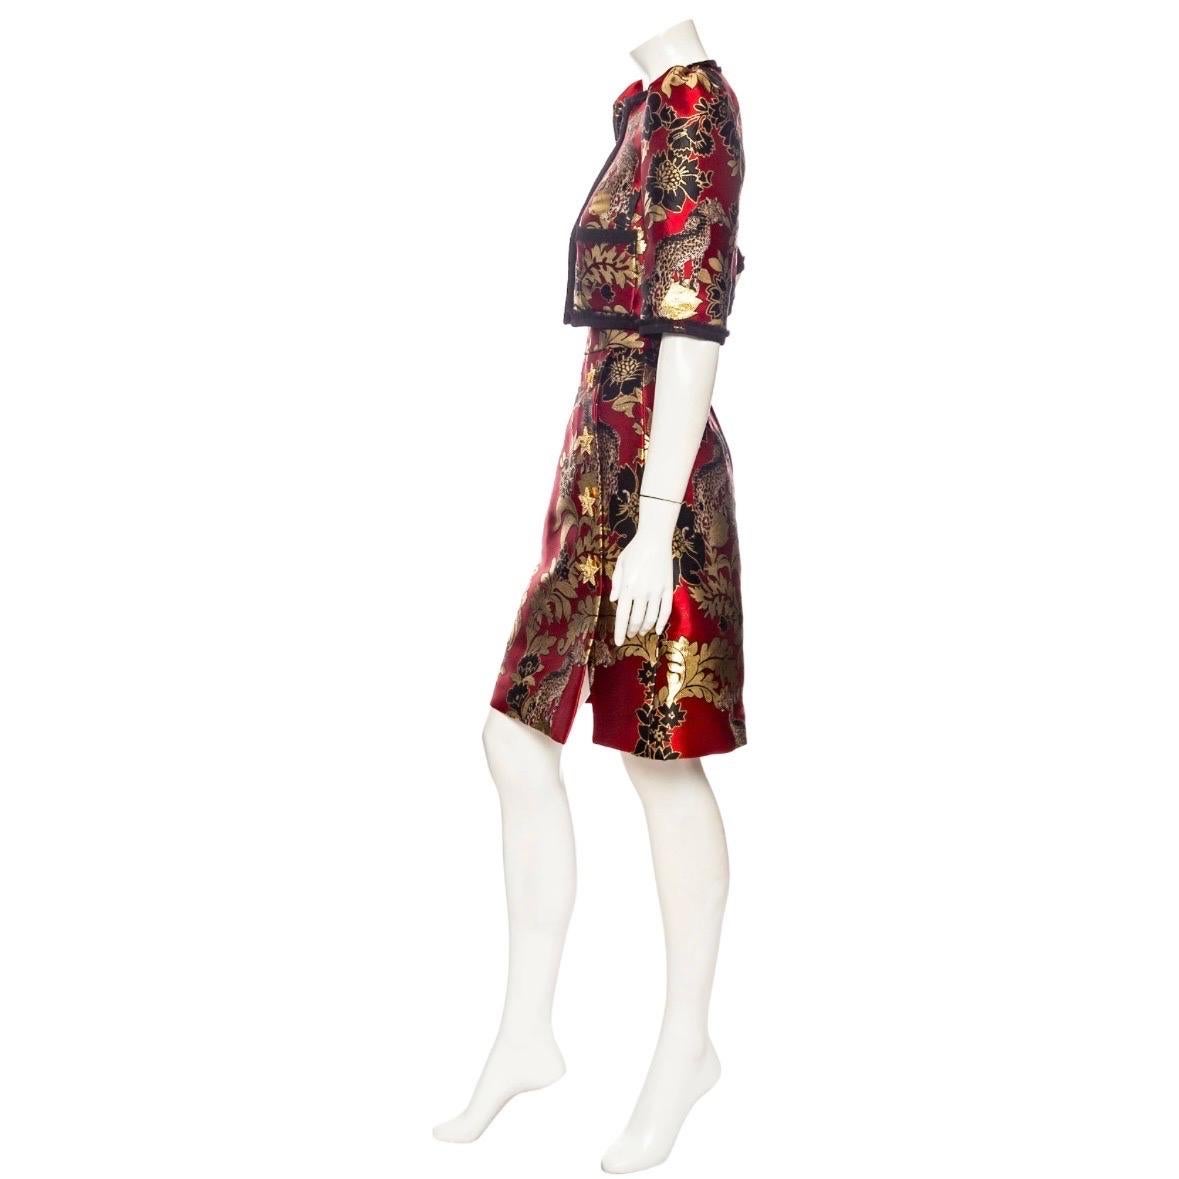 Dolce & Gabbana Gold and Red Leopard Motif Jacquard Jacket and Skirt Set In Excellent Condition For Sale In Los Angeles, CA